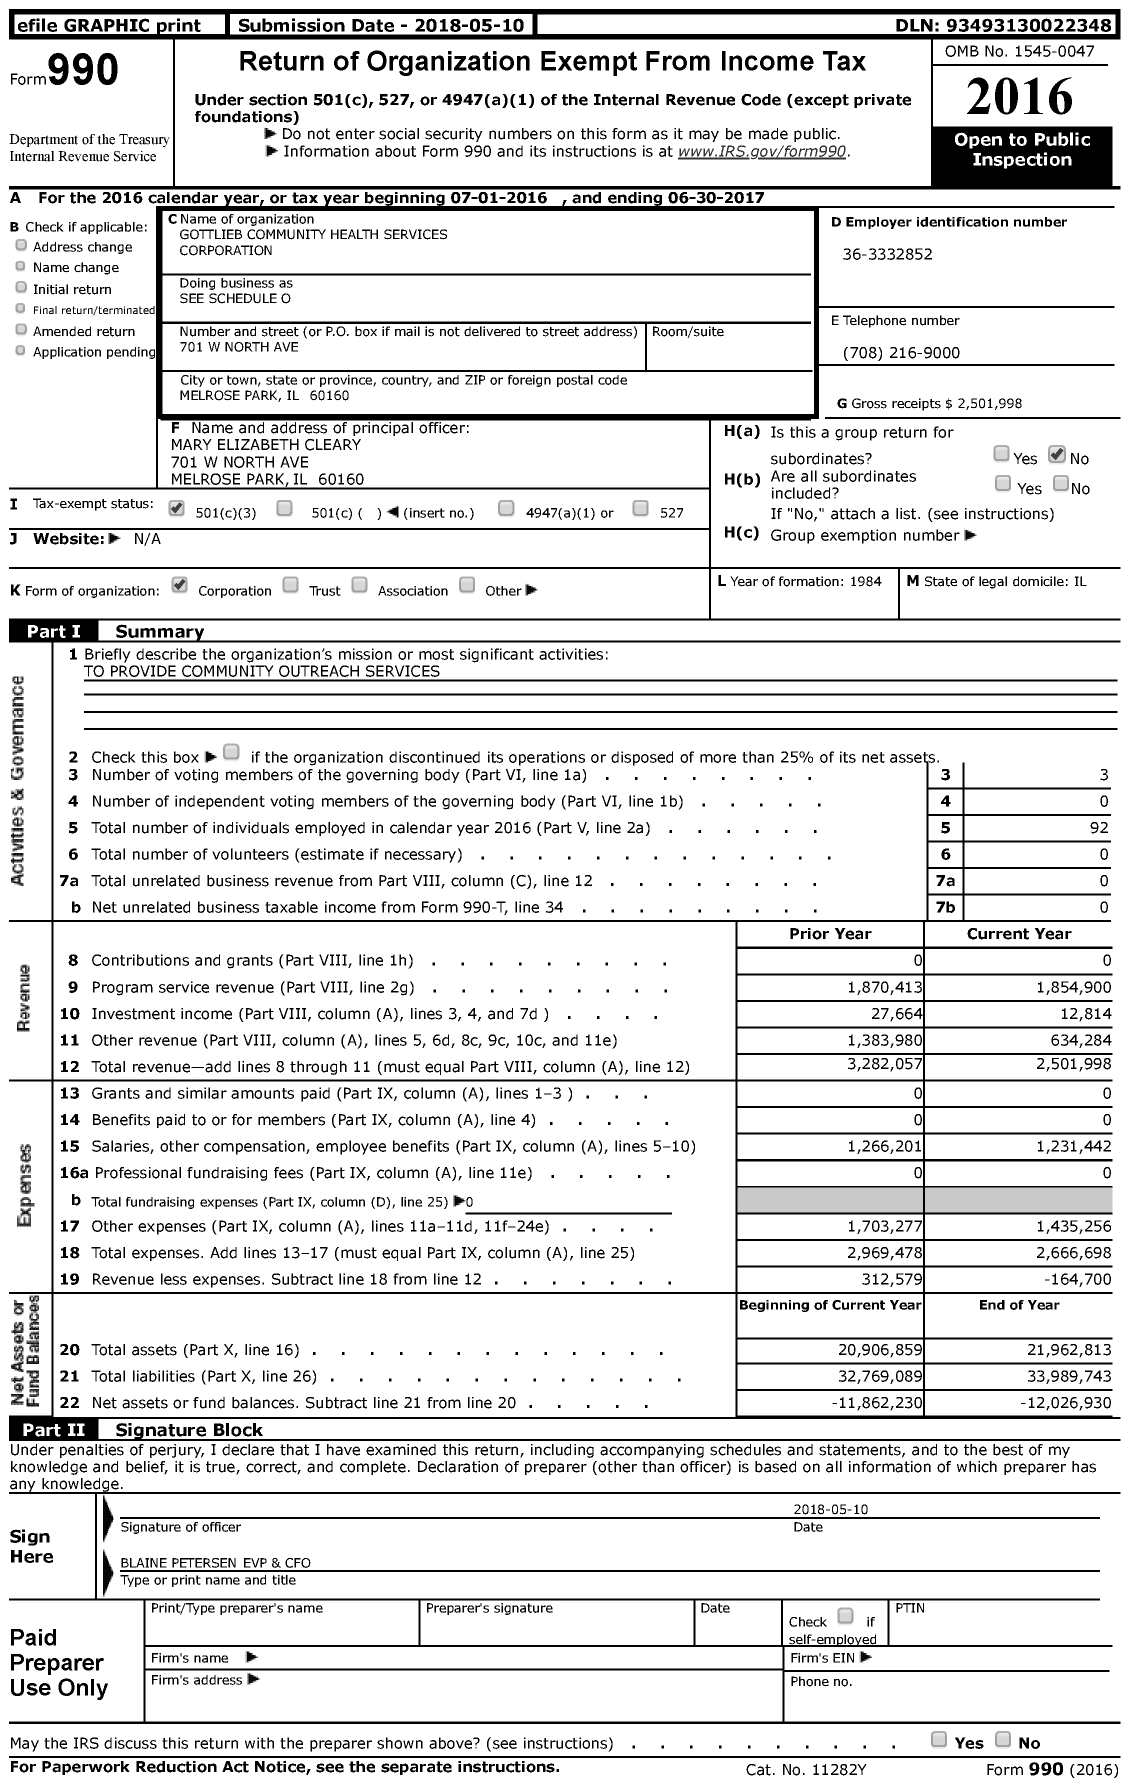 Image of first page of 2016 Form 990 for Gottlieb Community Health Services Corporation